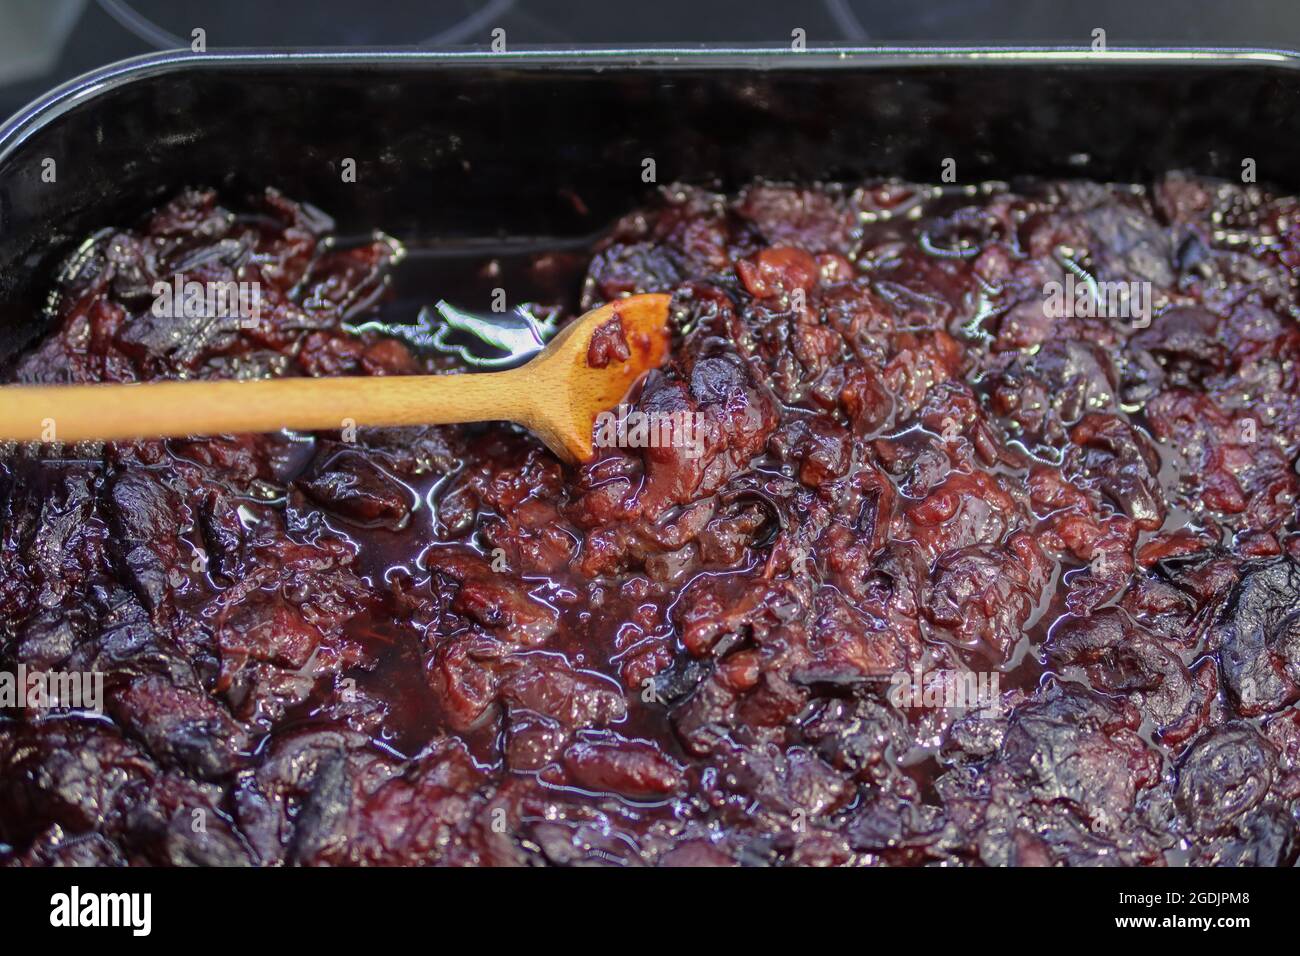 Preparation of plum jam at home in the kitchen, a wooden spoon mixes boiled plums Stock Photo